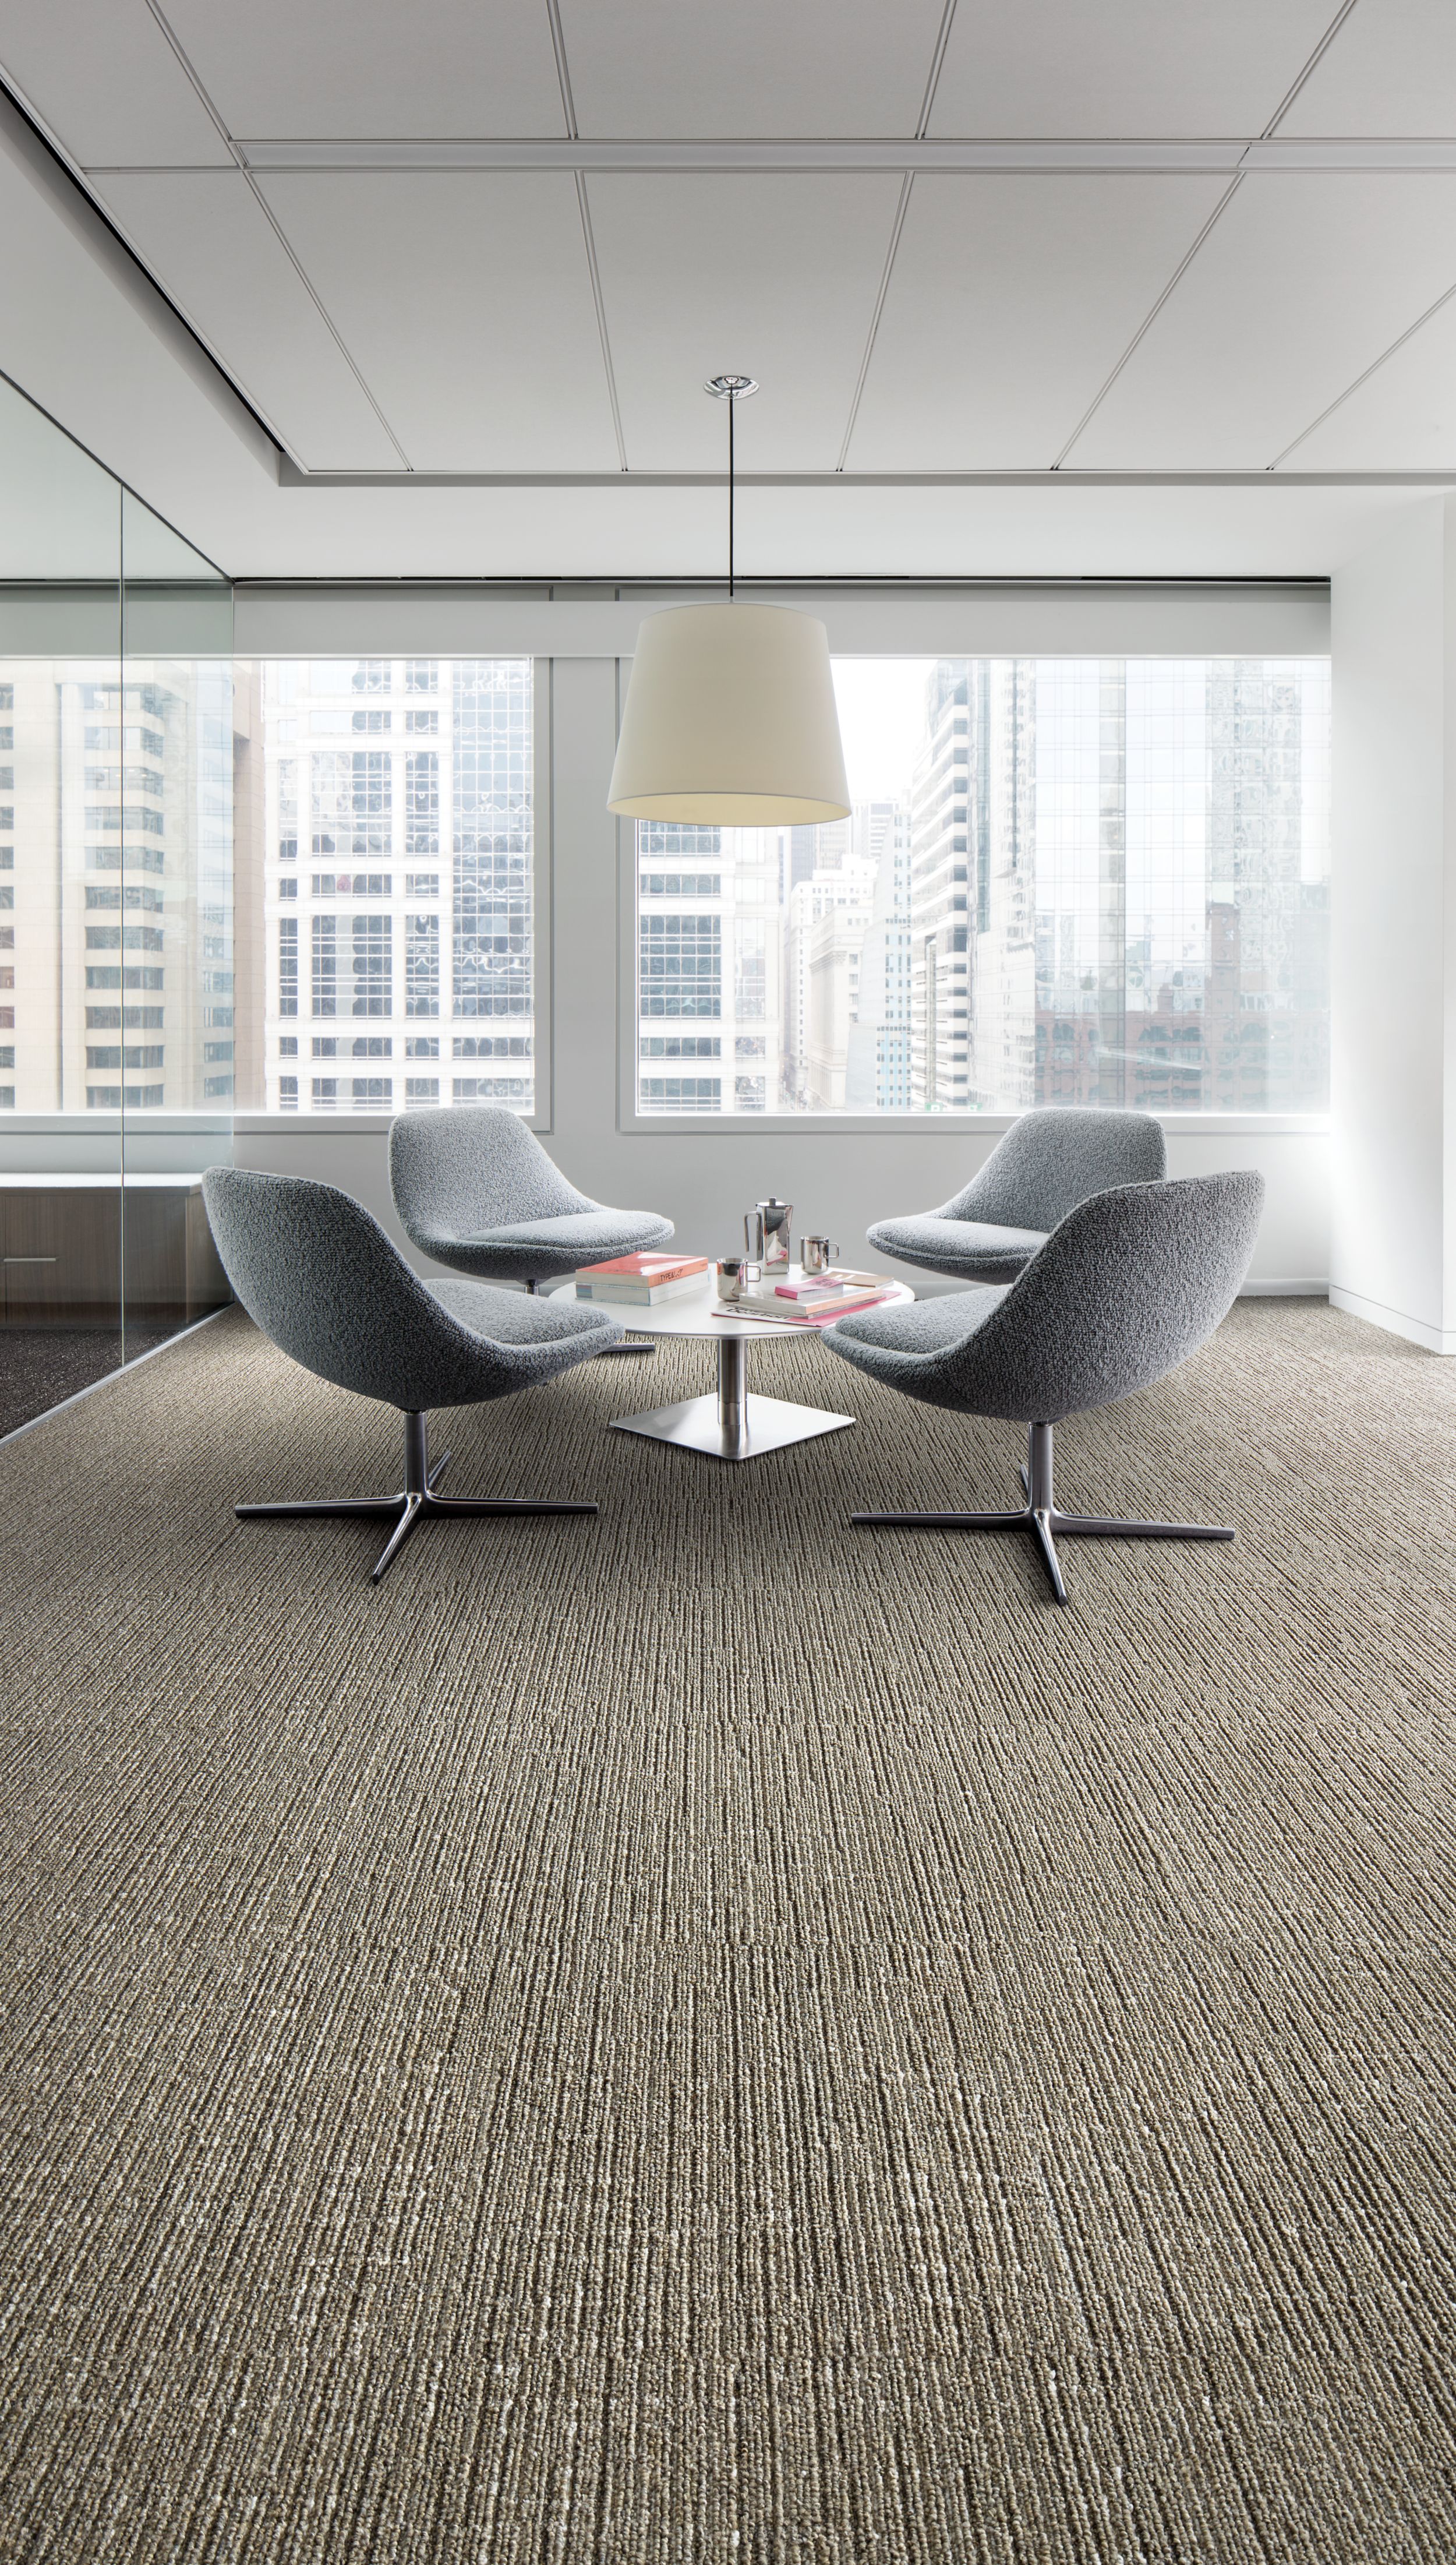 Interface Night Flight carpet tile in office sitting area with large windows and city view imagen número 4